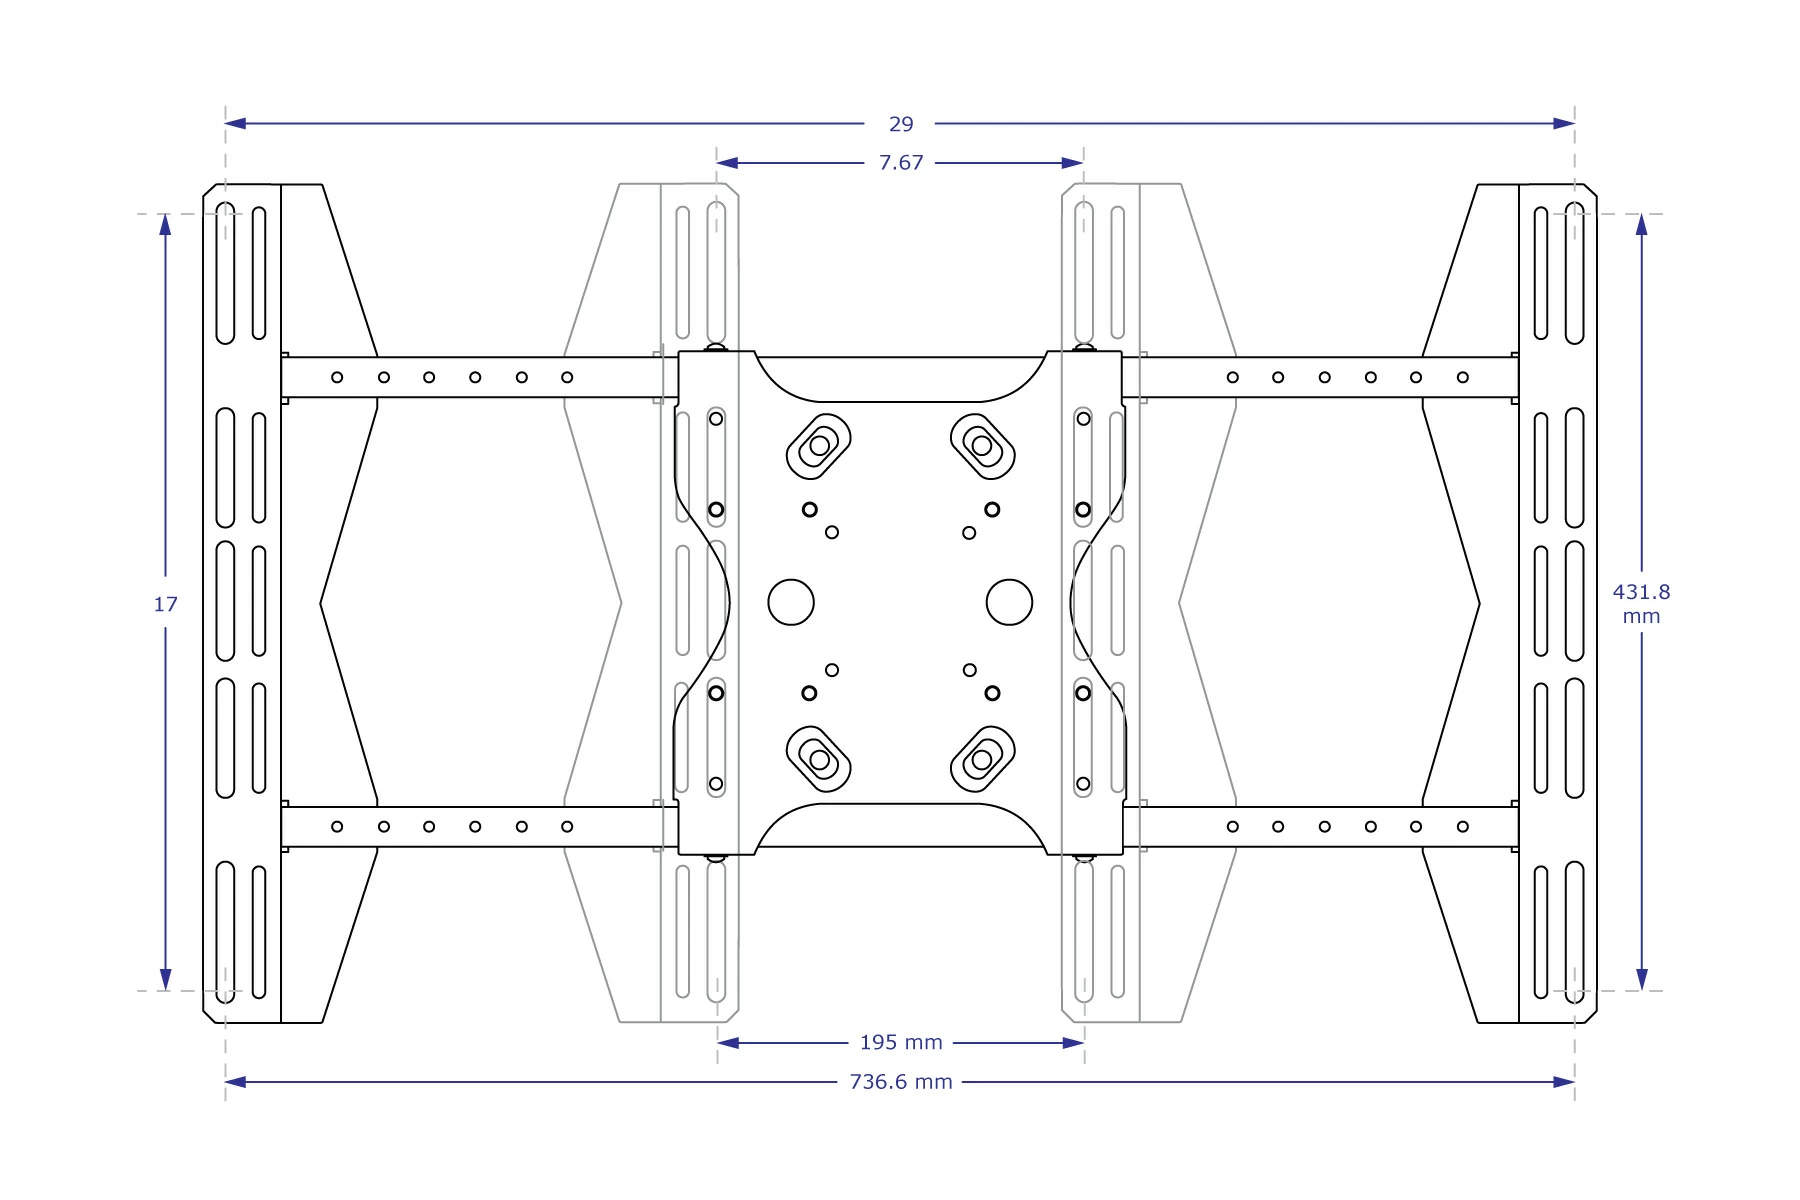 Specification drawing of the MSU4x6 vesa plate at its widest and narrowest settings